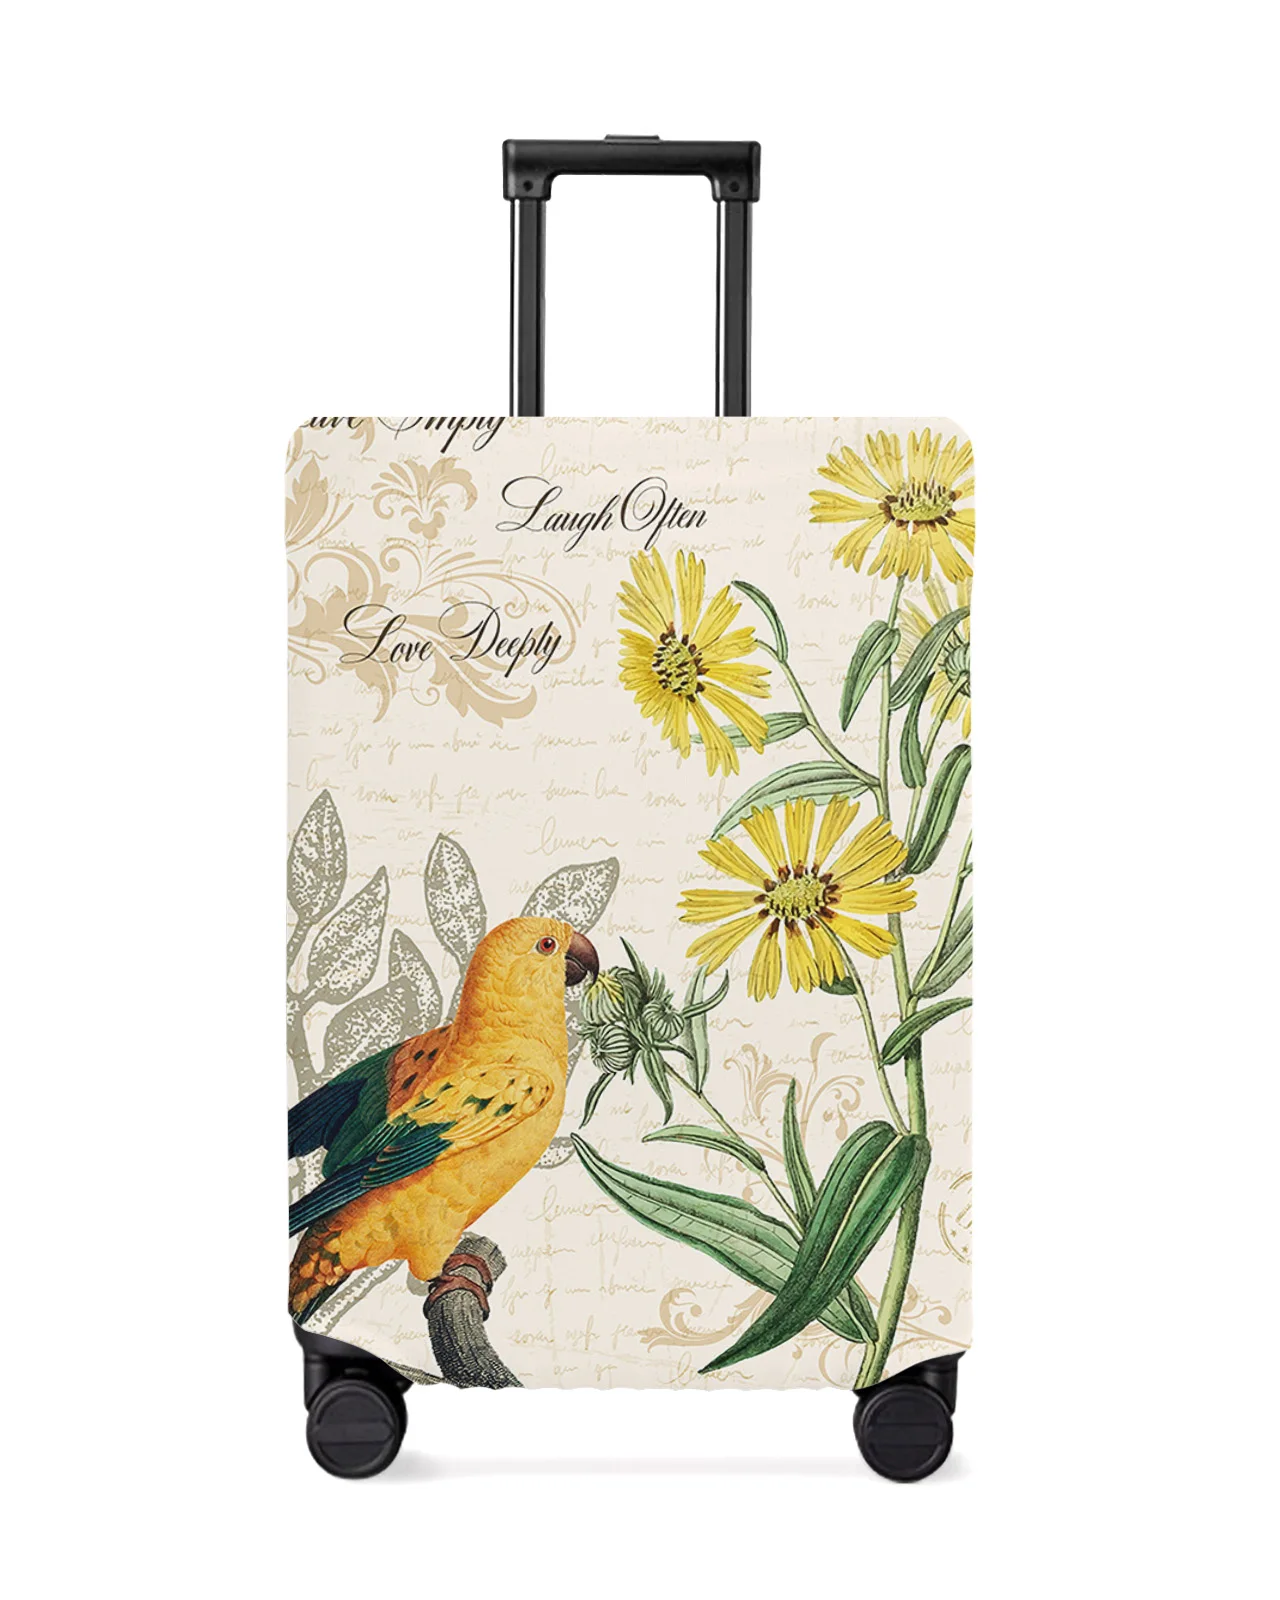 yellow-parrot-sunflower-retro-travel-luggage-cover-elastic-baggage-cover-suitcase-case-dust-cover-travel-accessories